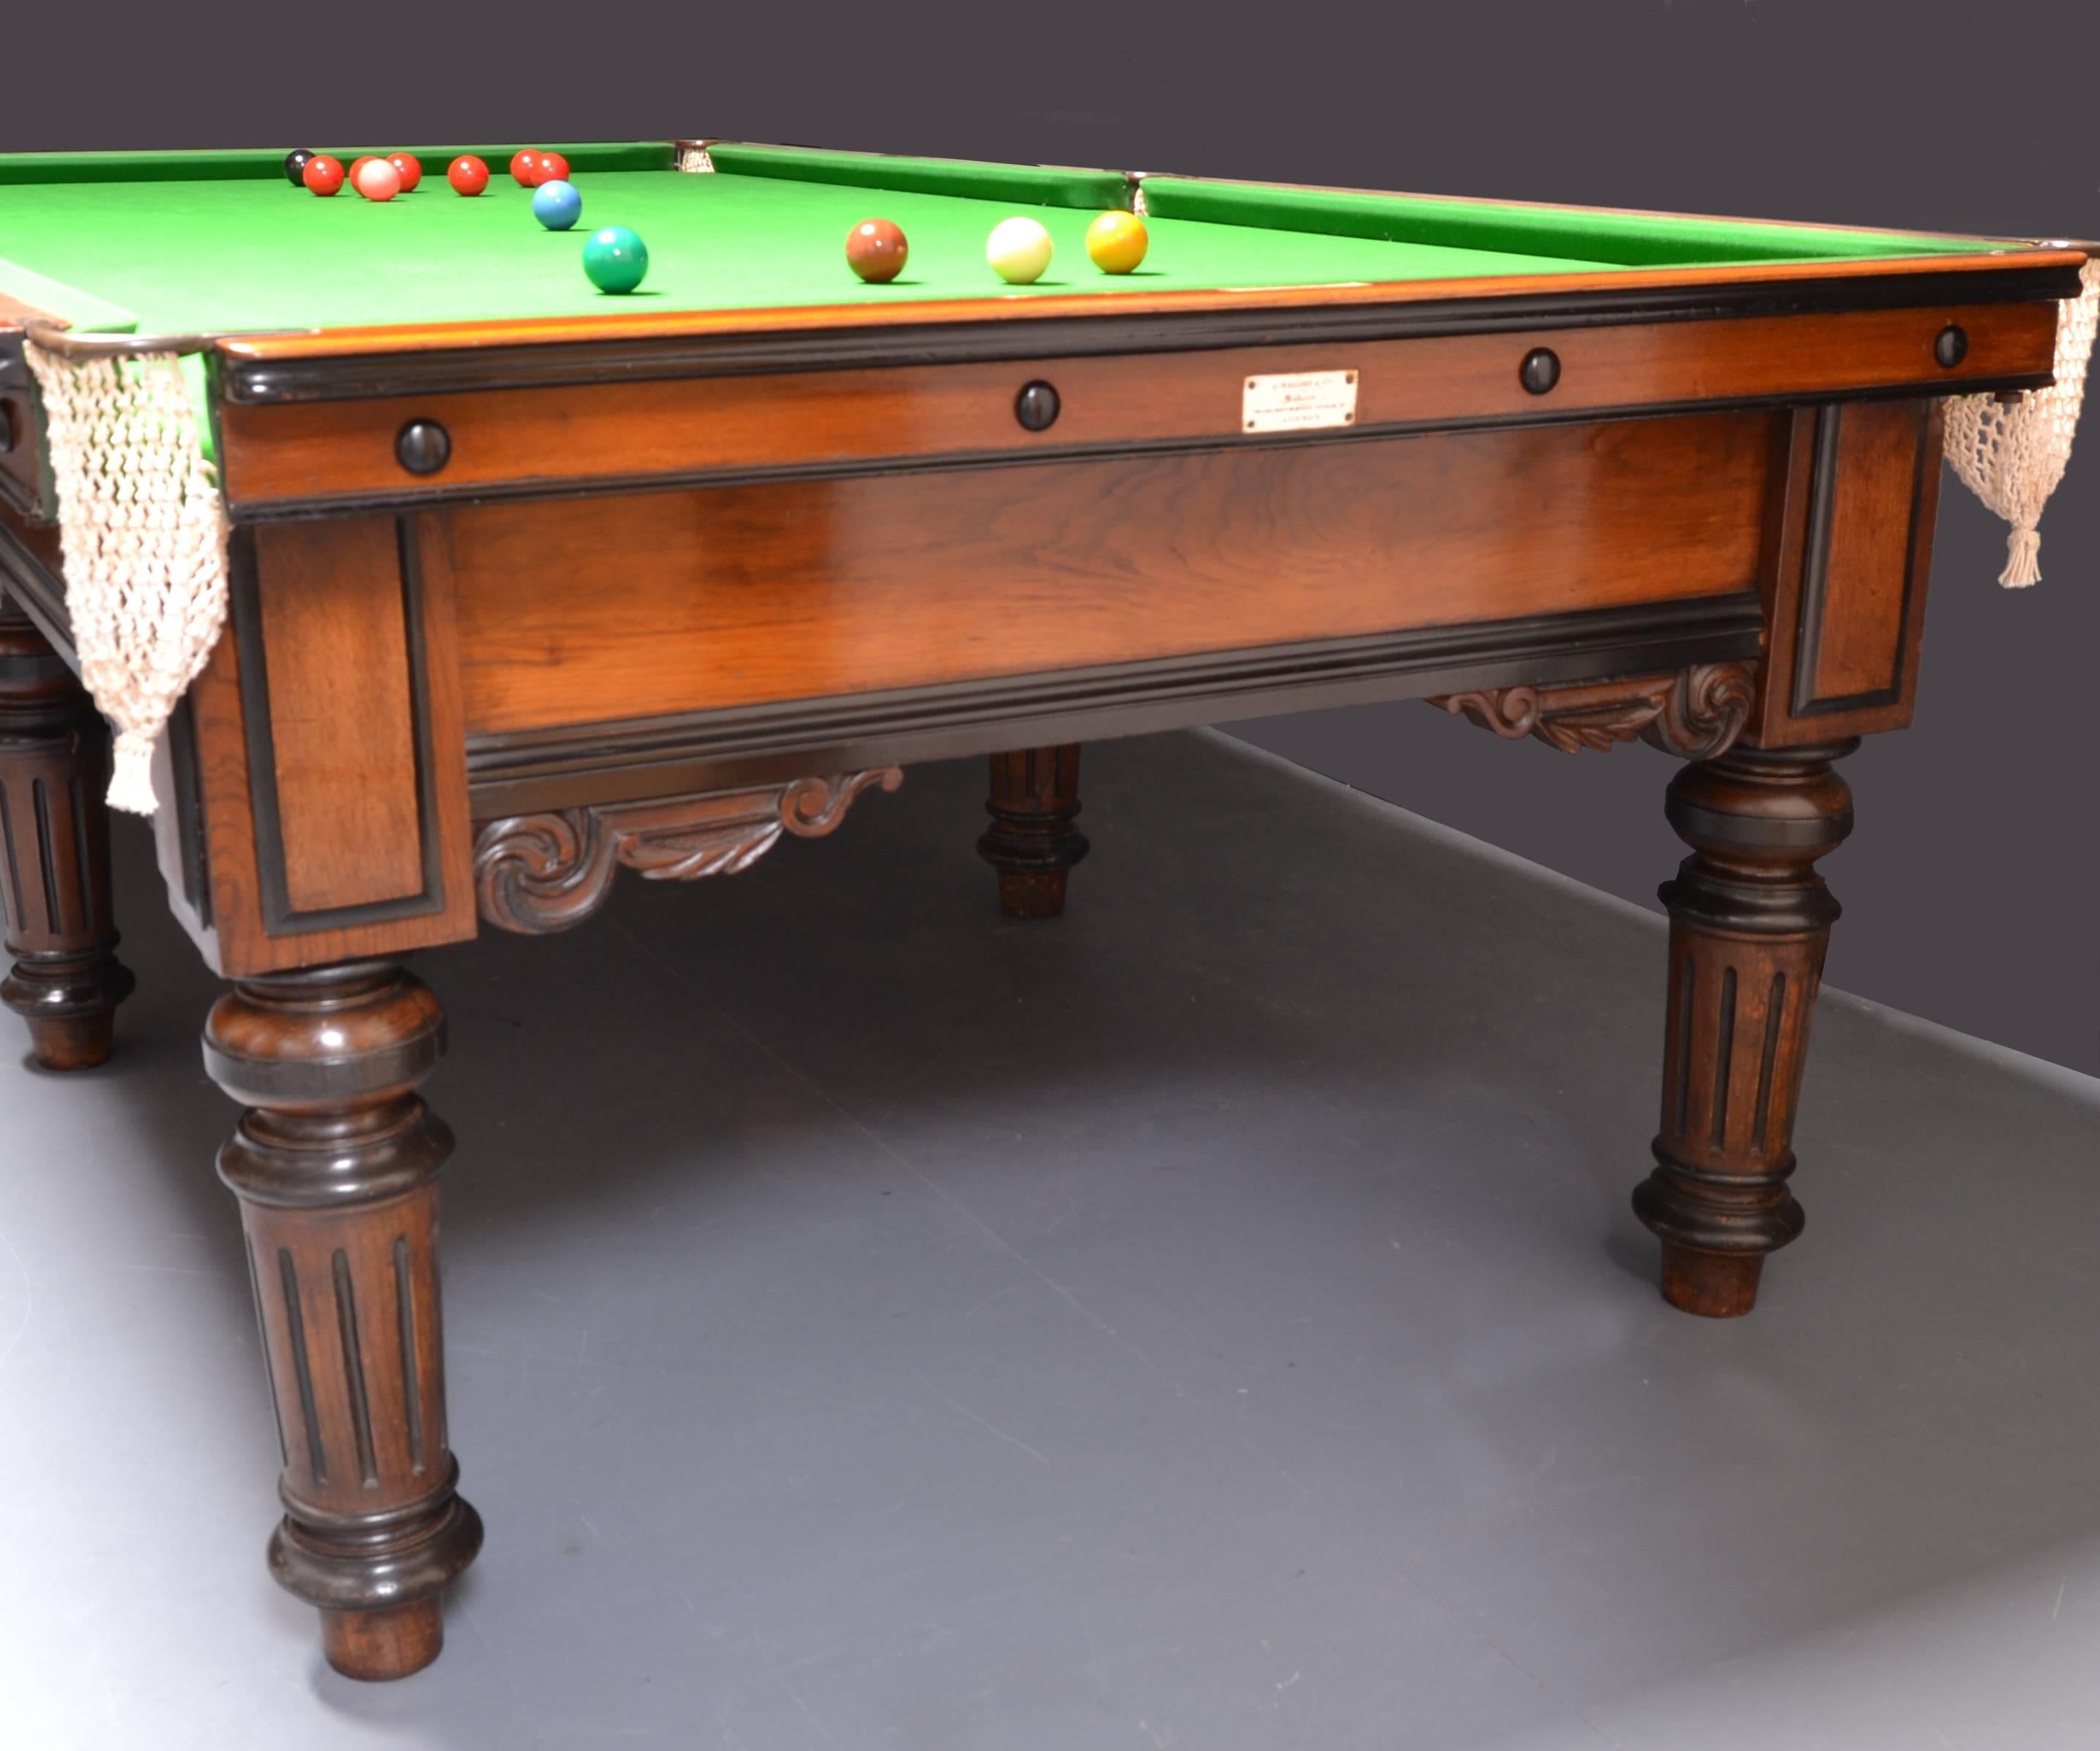 This oak framed three quarter size antique billiard snooker table stands on six elegant turned and fluted legs with carved corbel brackets to the side frame. 

The table is finished in an attractive golden oak with ebonised mouldings and applied